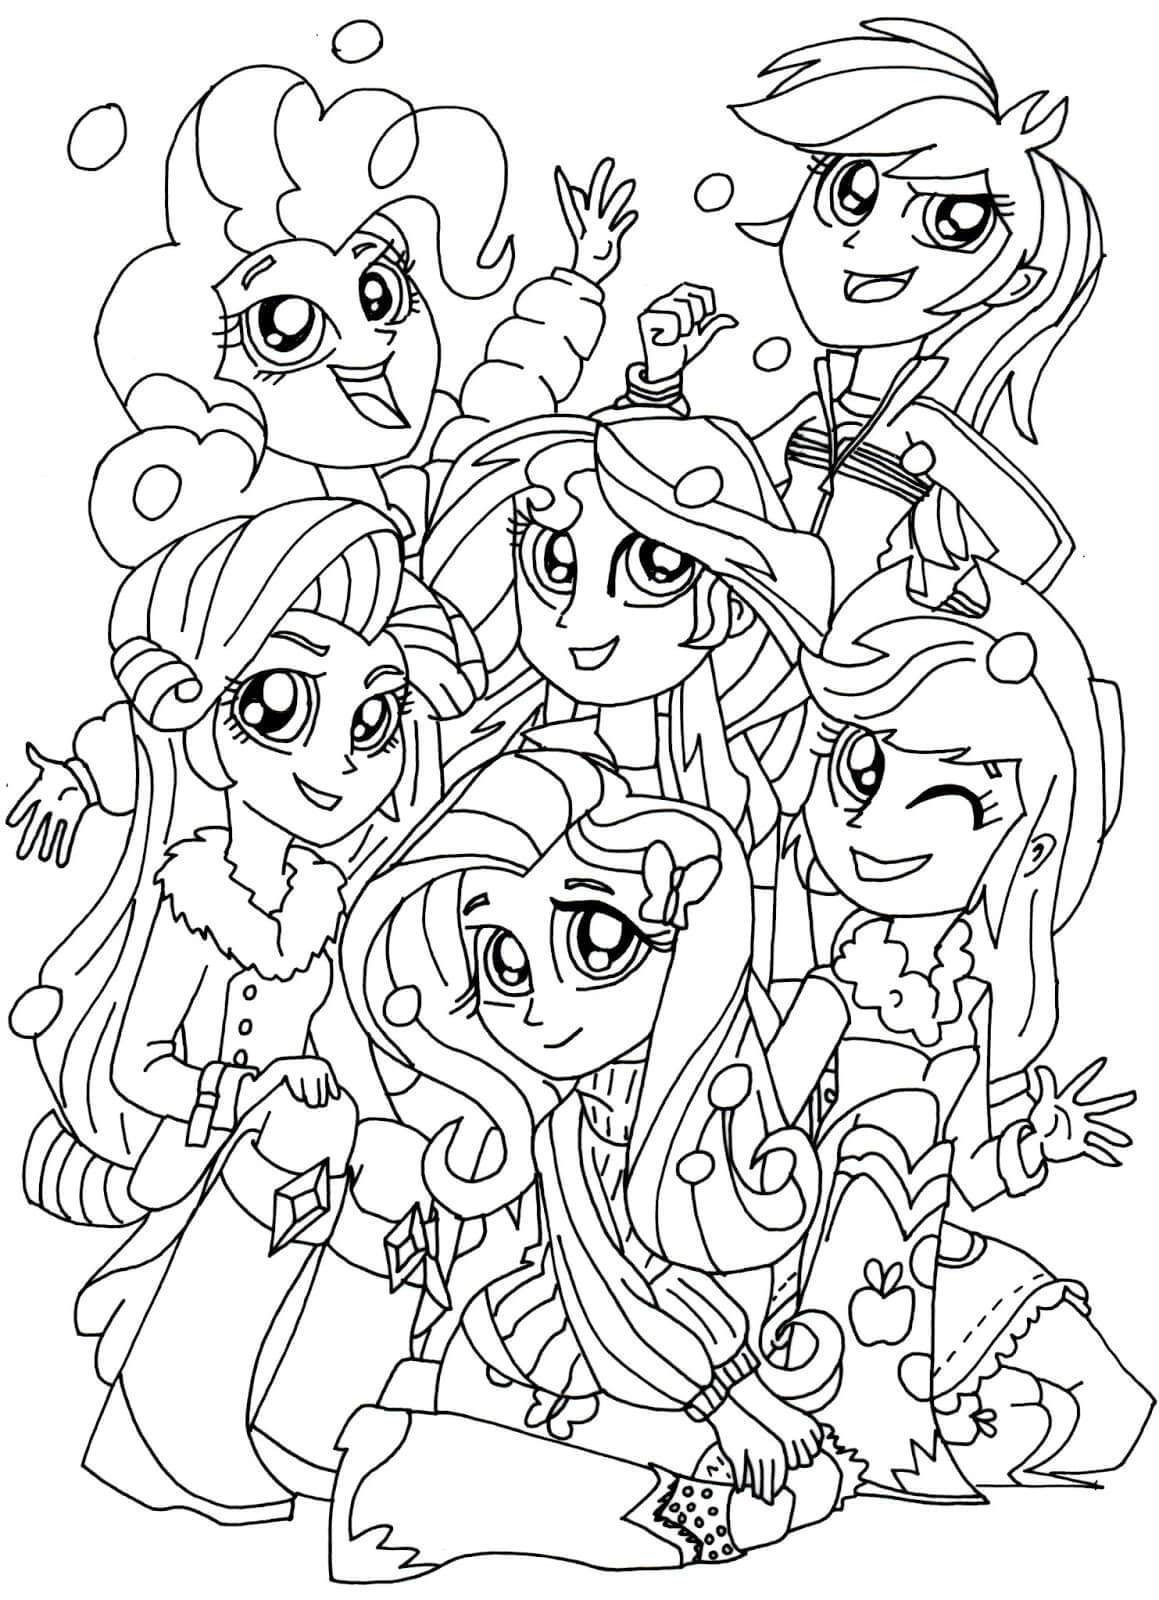 Equestria Girls Printable Coloring Pages
 My Little Pony Equestria Girls Coloring Pages